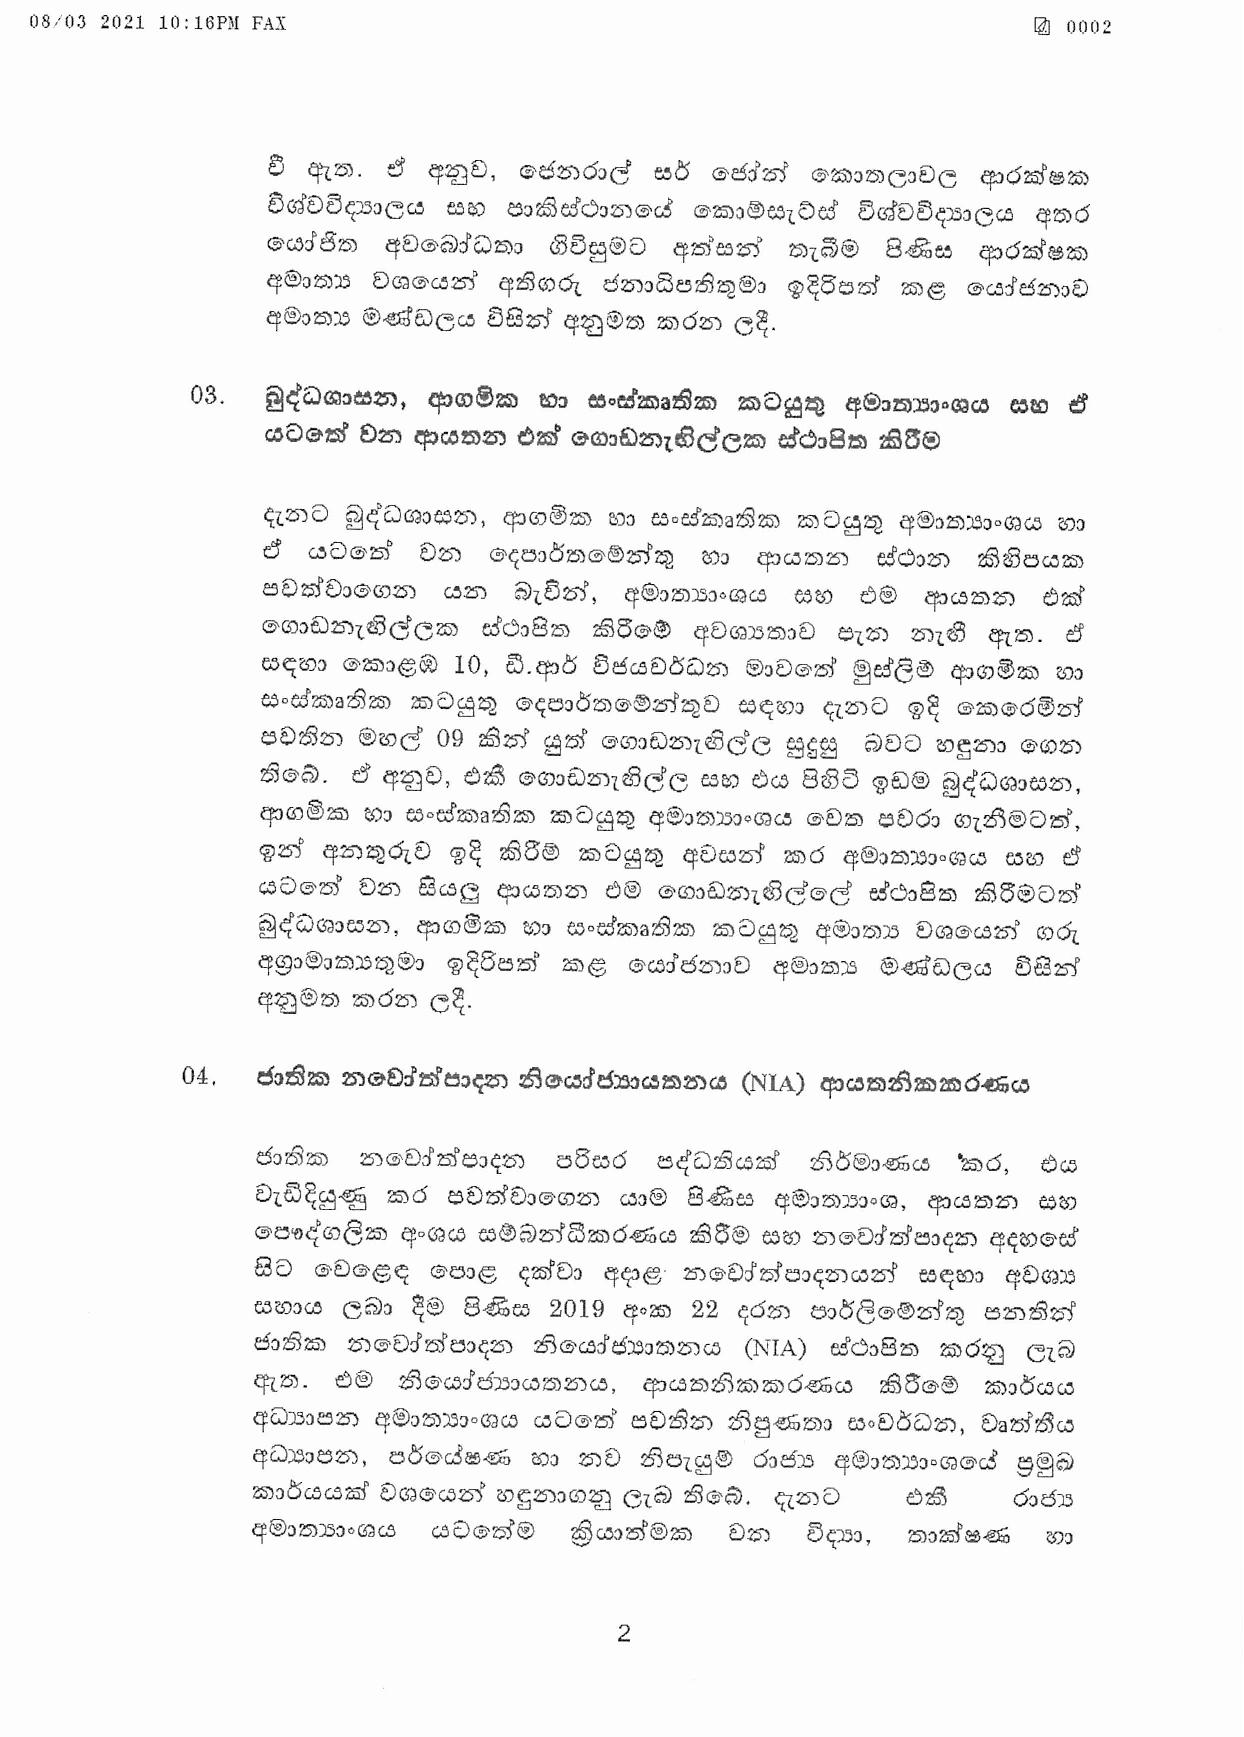 Cabinet Decision on 08.03.2021 page 002